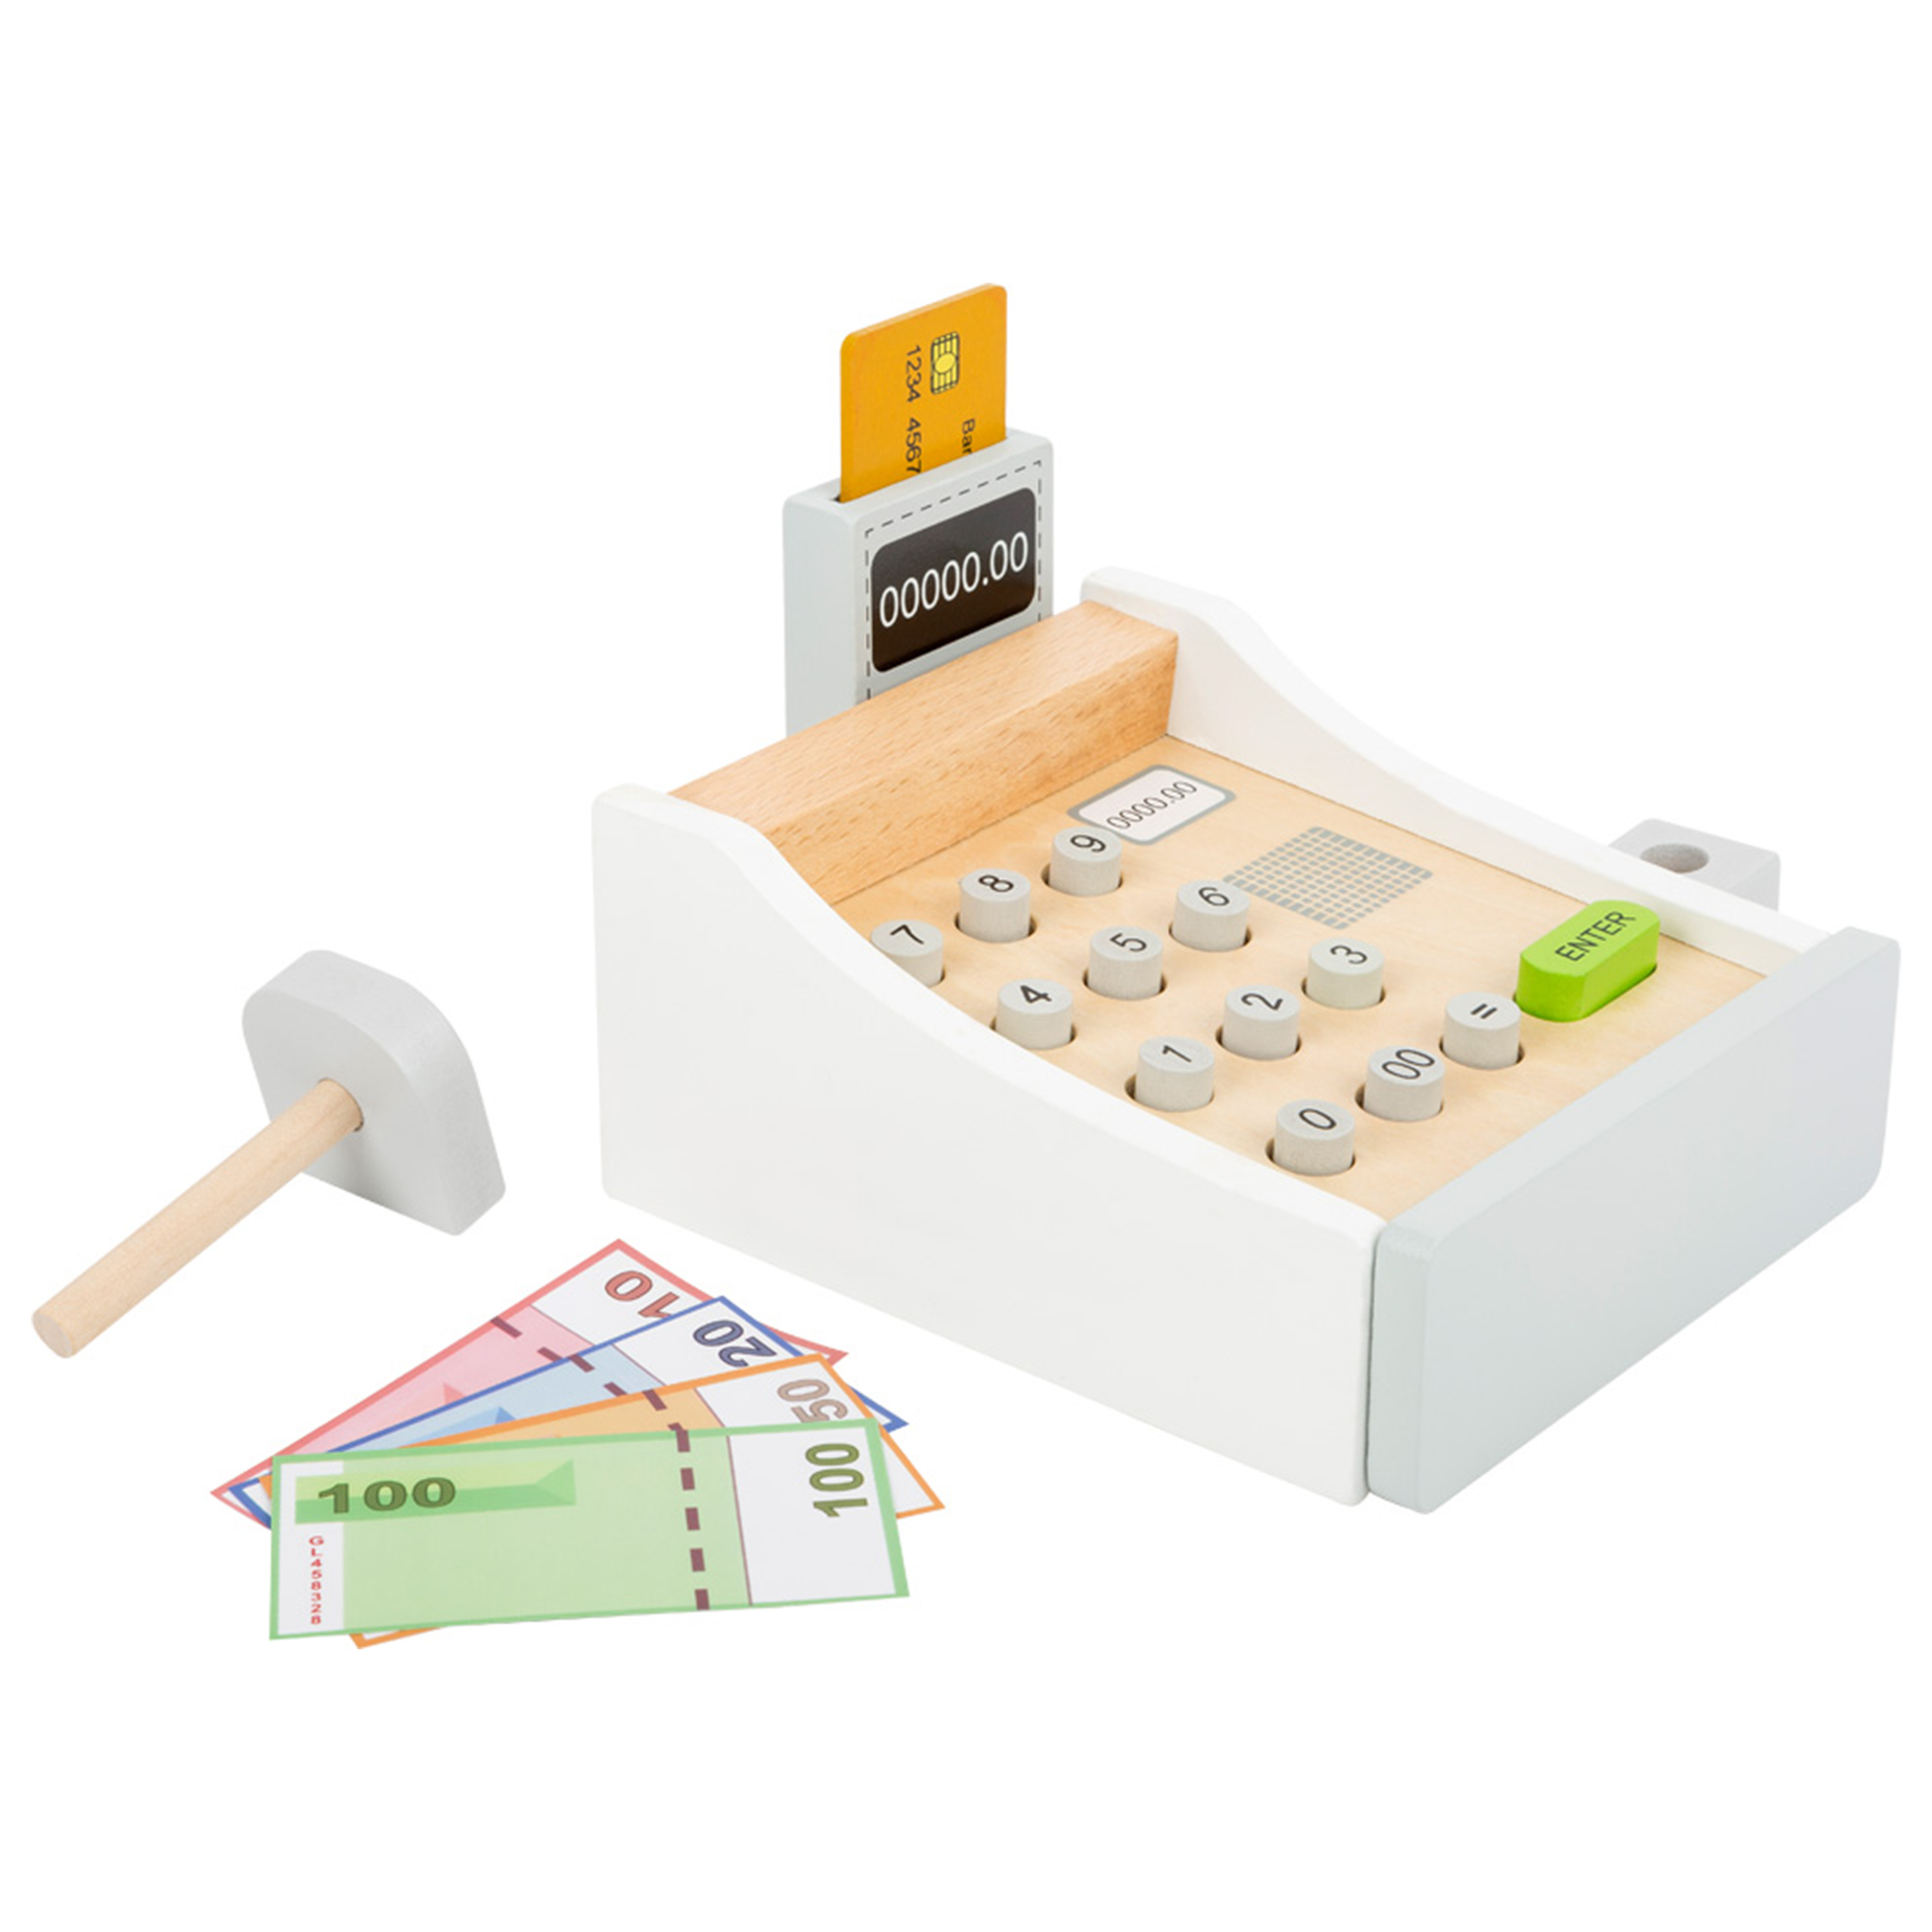 Small Foot Wooden Toys - Play Cash Register - image 2 of 4